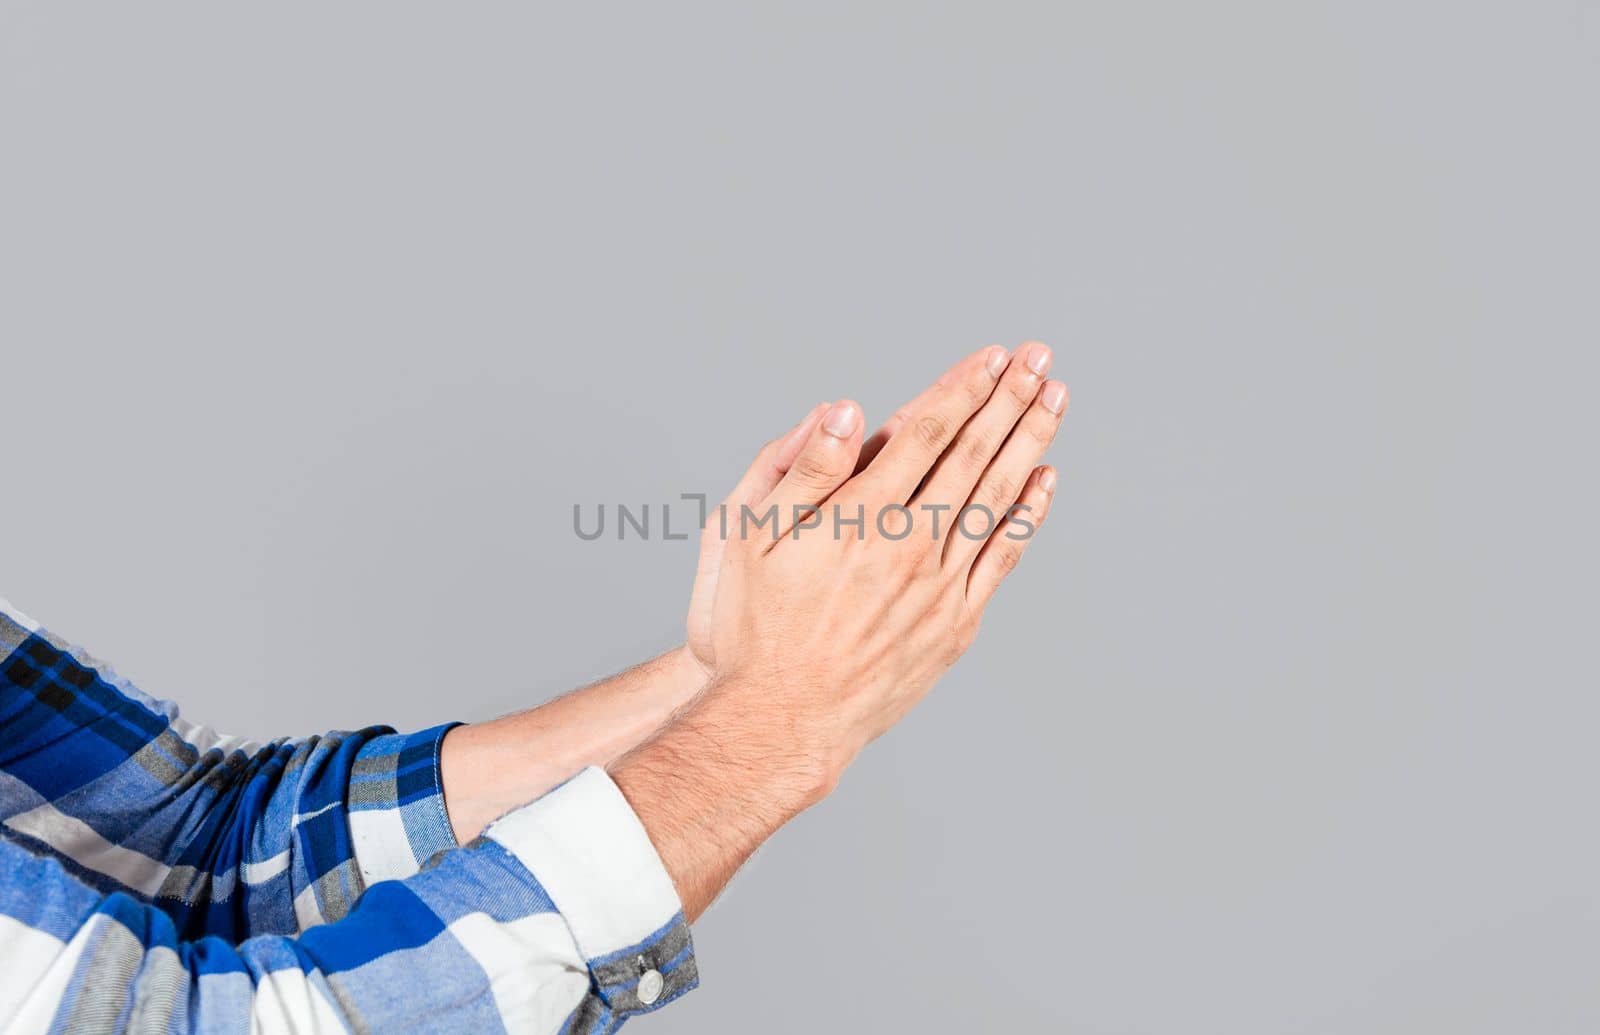 Two hands together in prayer position. Two hands together in prayer on isolated background. Concept of prayer and hands together. Two hands together thanking or asking for forgiveness by isaiphoto